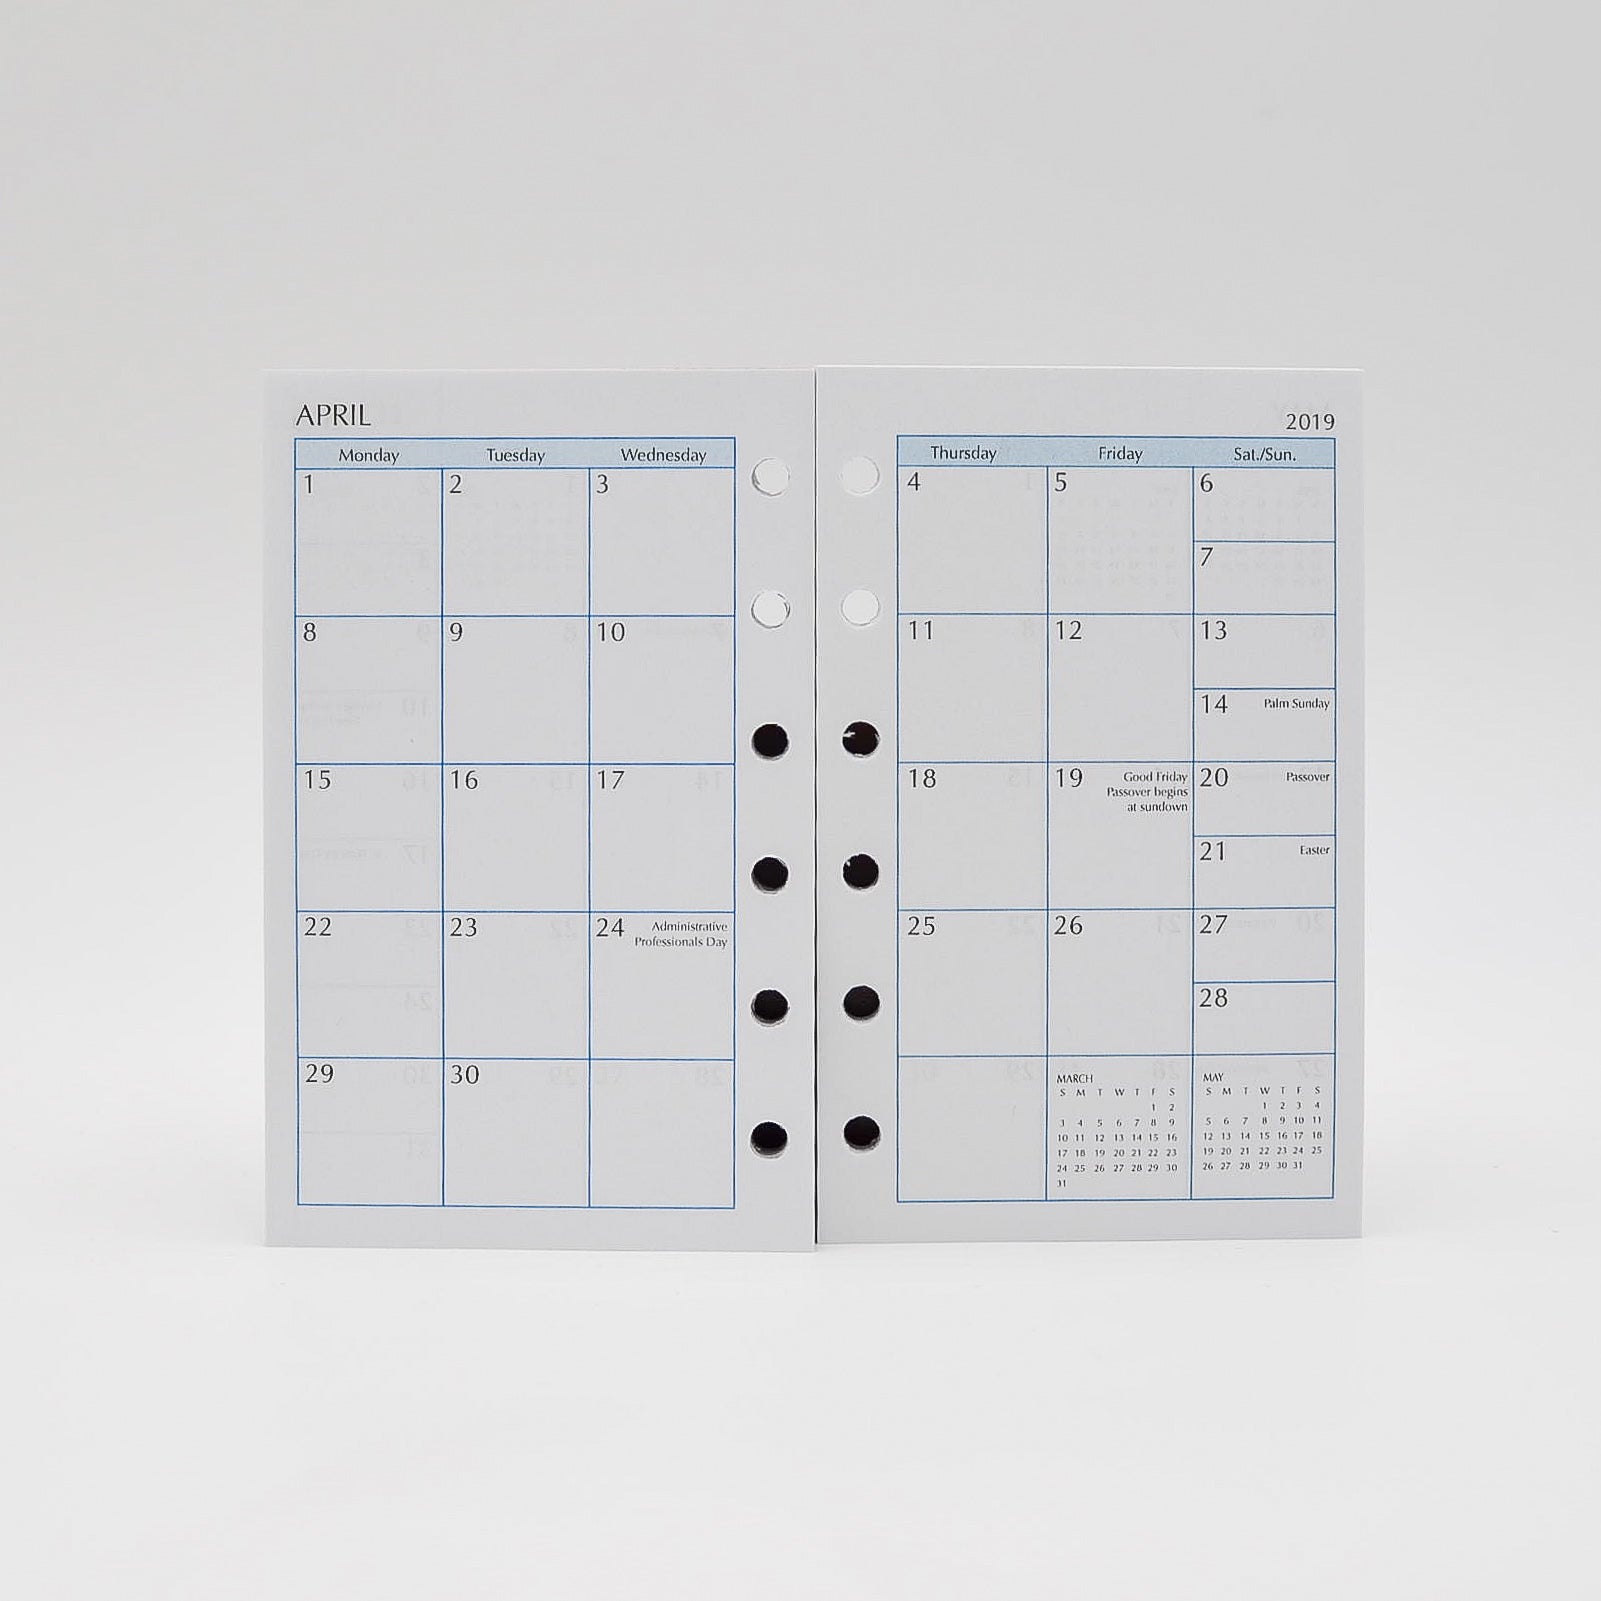 Address / Telephone 3-1/8 x 5 6-Hole Sheets: MA35P6 – Refill Services